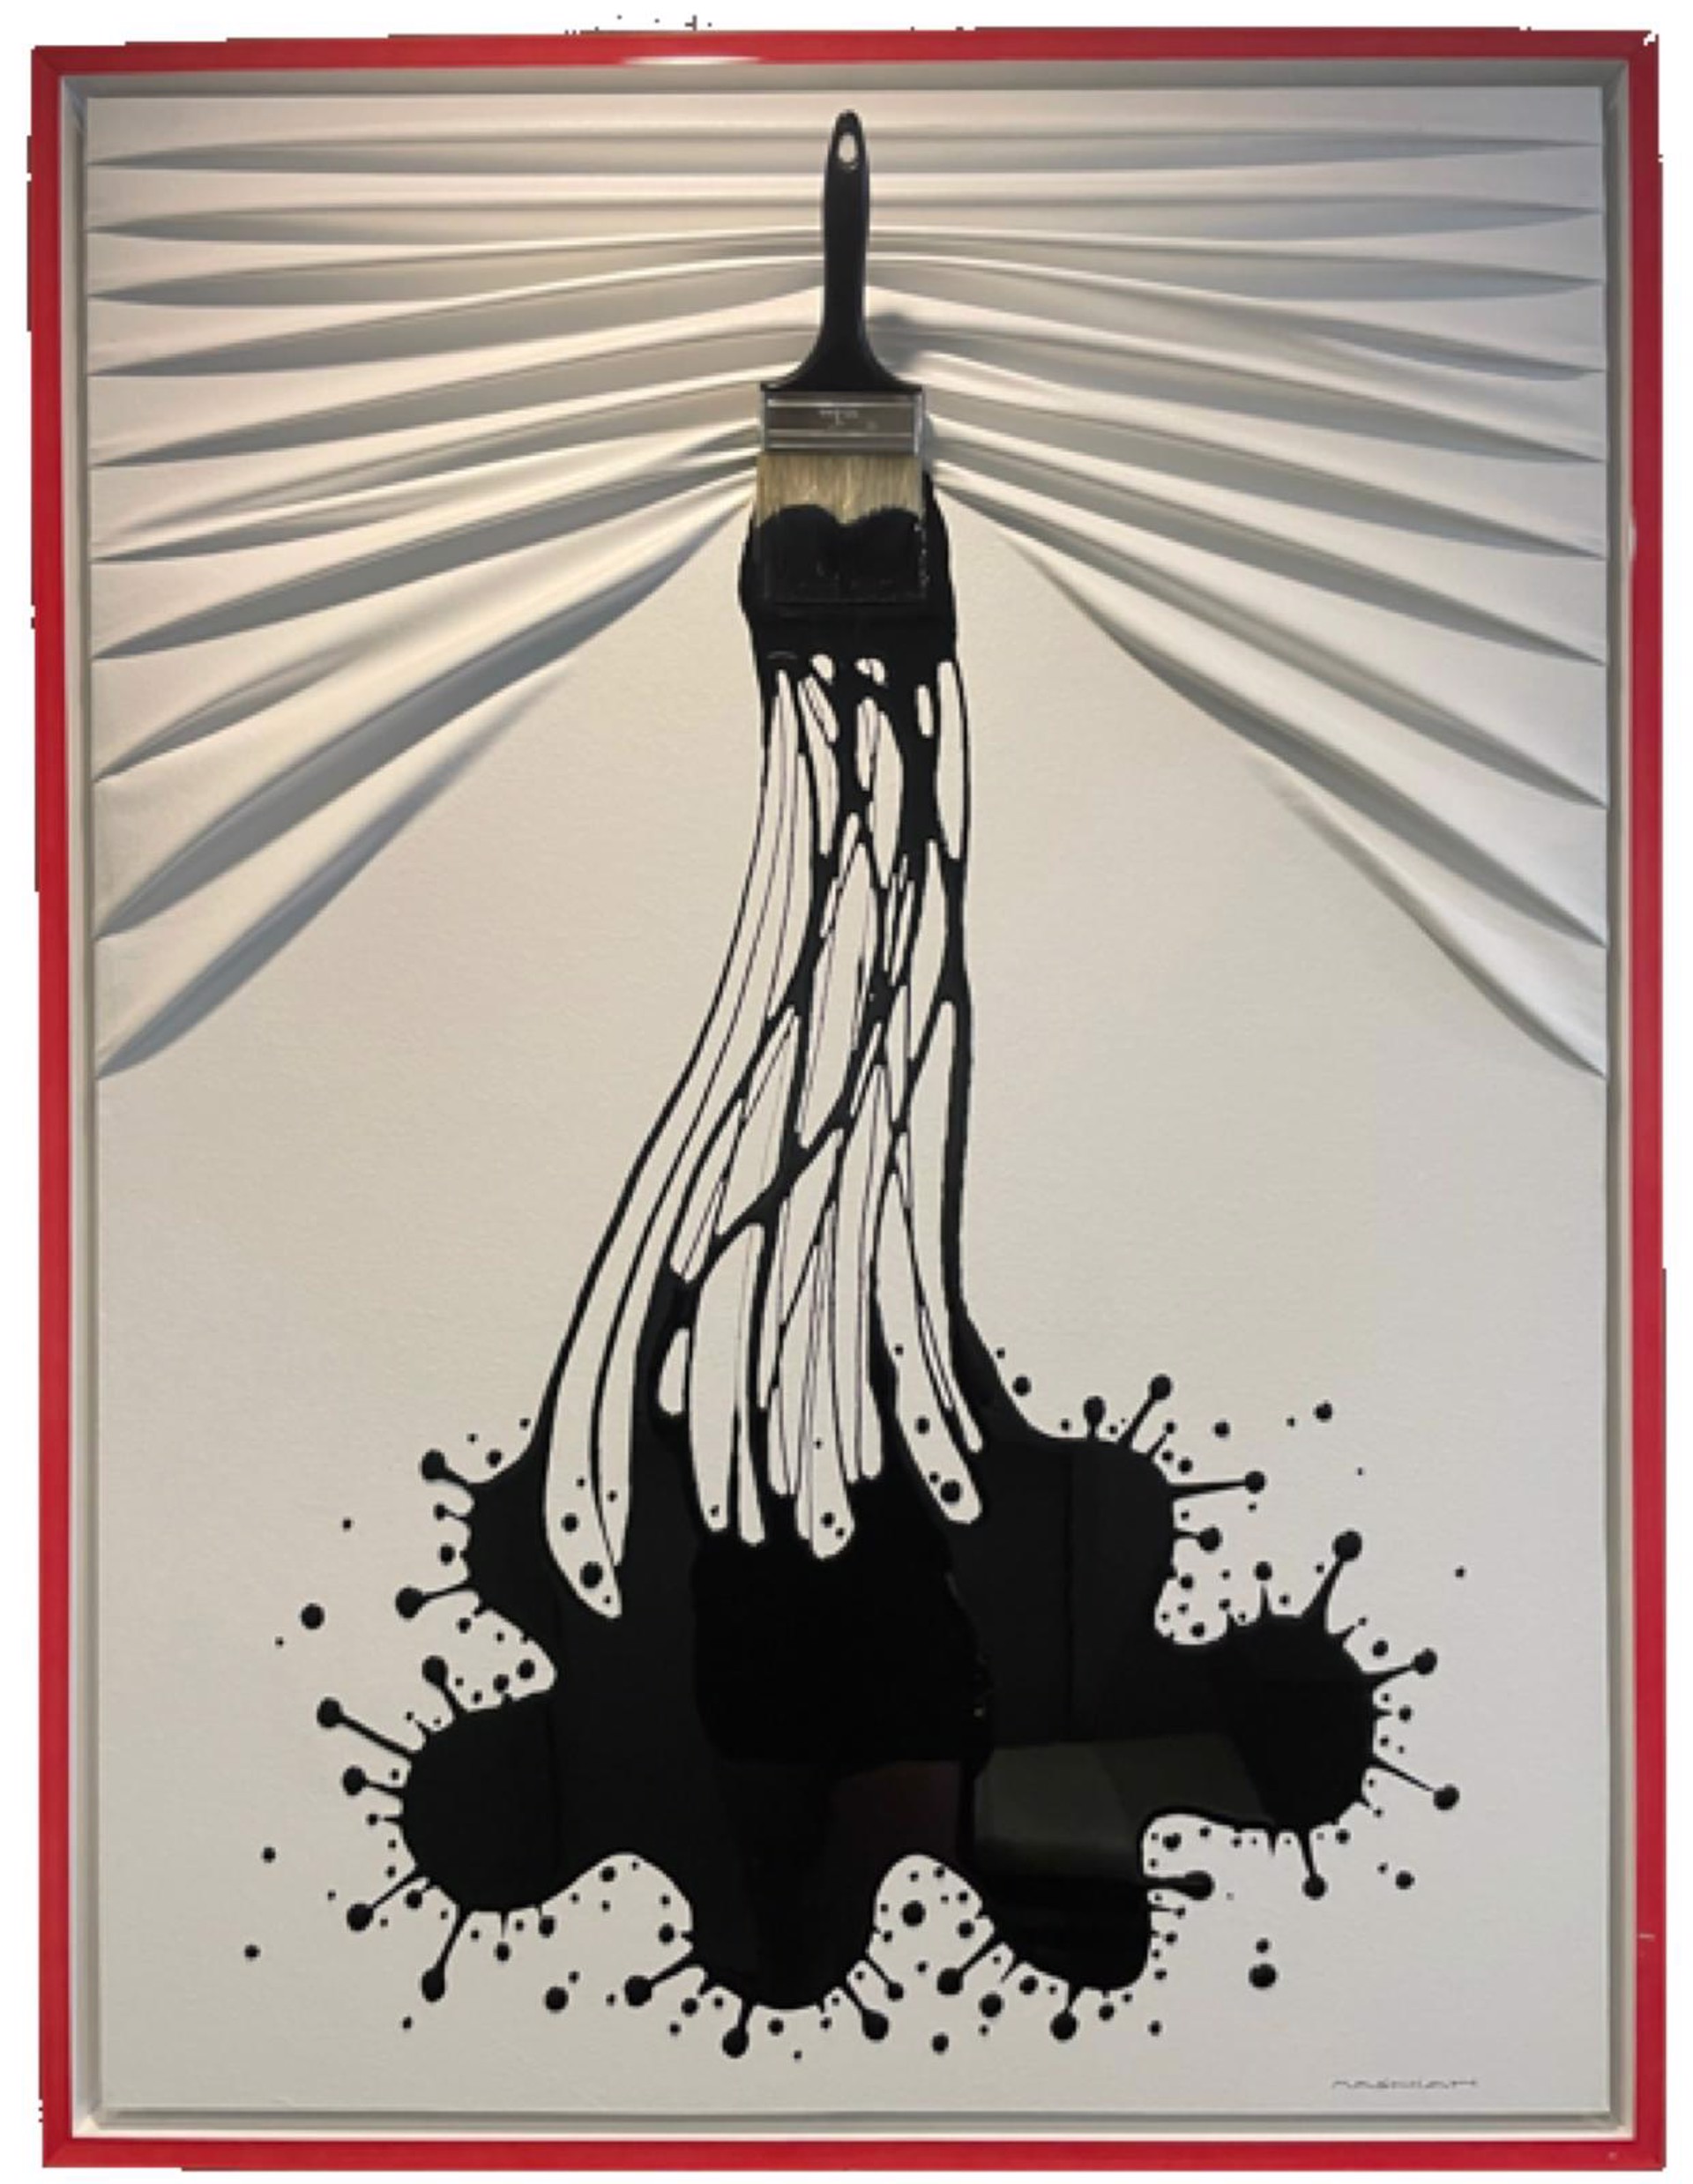 Black Splash on White Canvas In Red Frame by Brushes and Rollers "Let's Paint" by Efi Mashiah